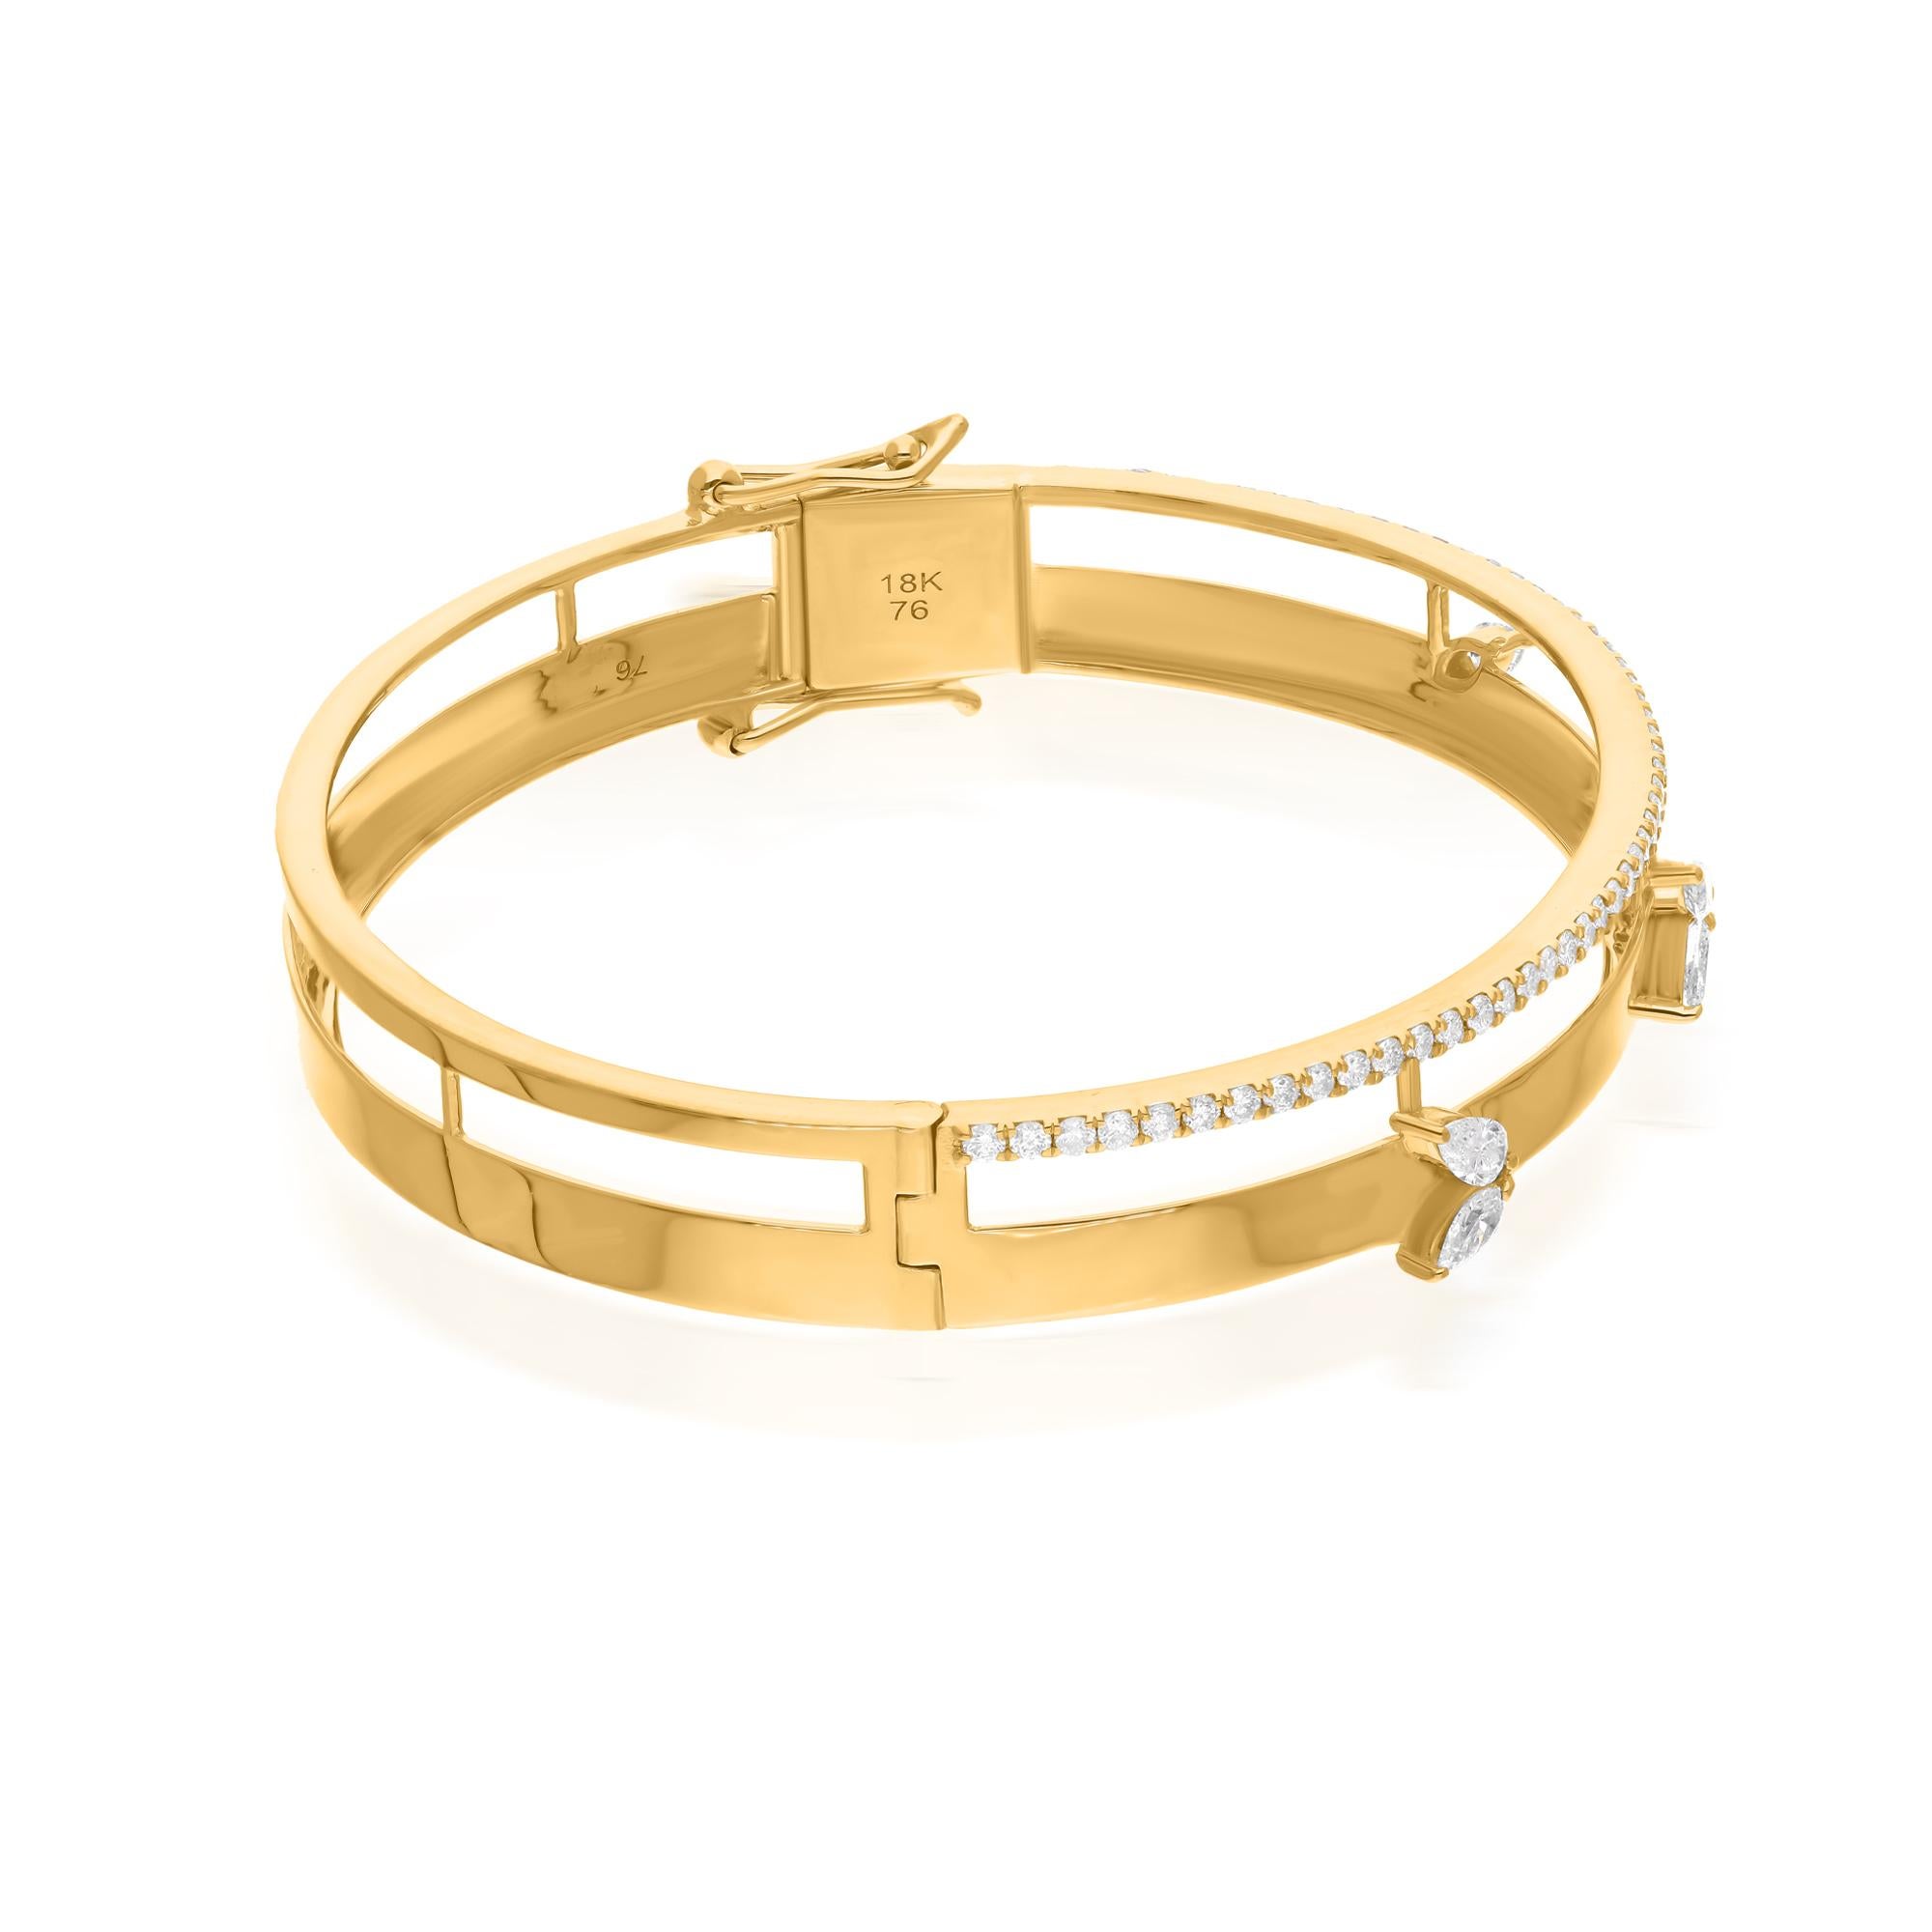 The 14 Karat Yellow Gold setting serves as the perfect backdrop, enhancing the beauty of the diamonds with its warm glow and luxurious finish. Expertly crafted links ensure a comfortable fit and effortless wear, while adding a touch of